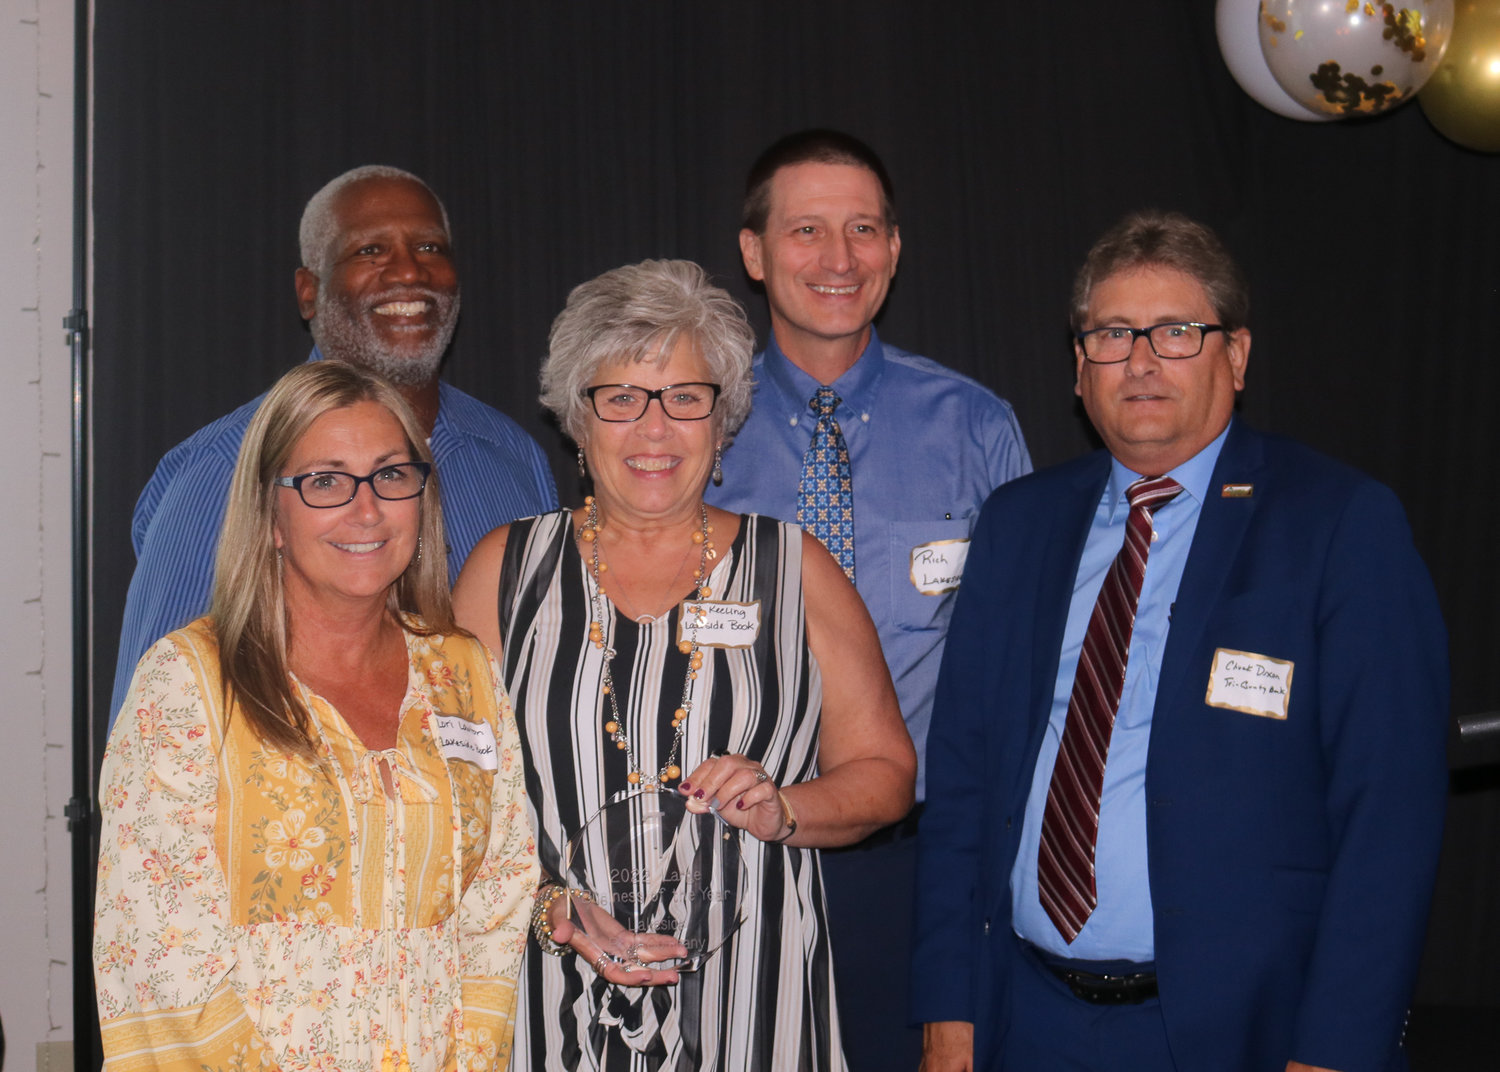 Tri-County Bank & Trust president and CEO Chuck Dixon, right, poses with members of the Lakeside Book Company team after accepting the Large Business of the Year award.